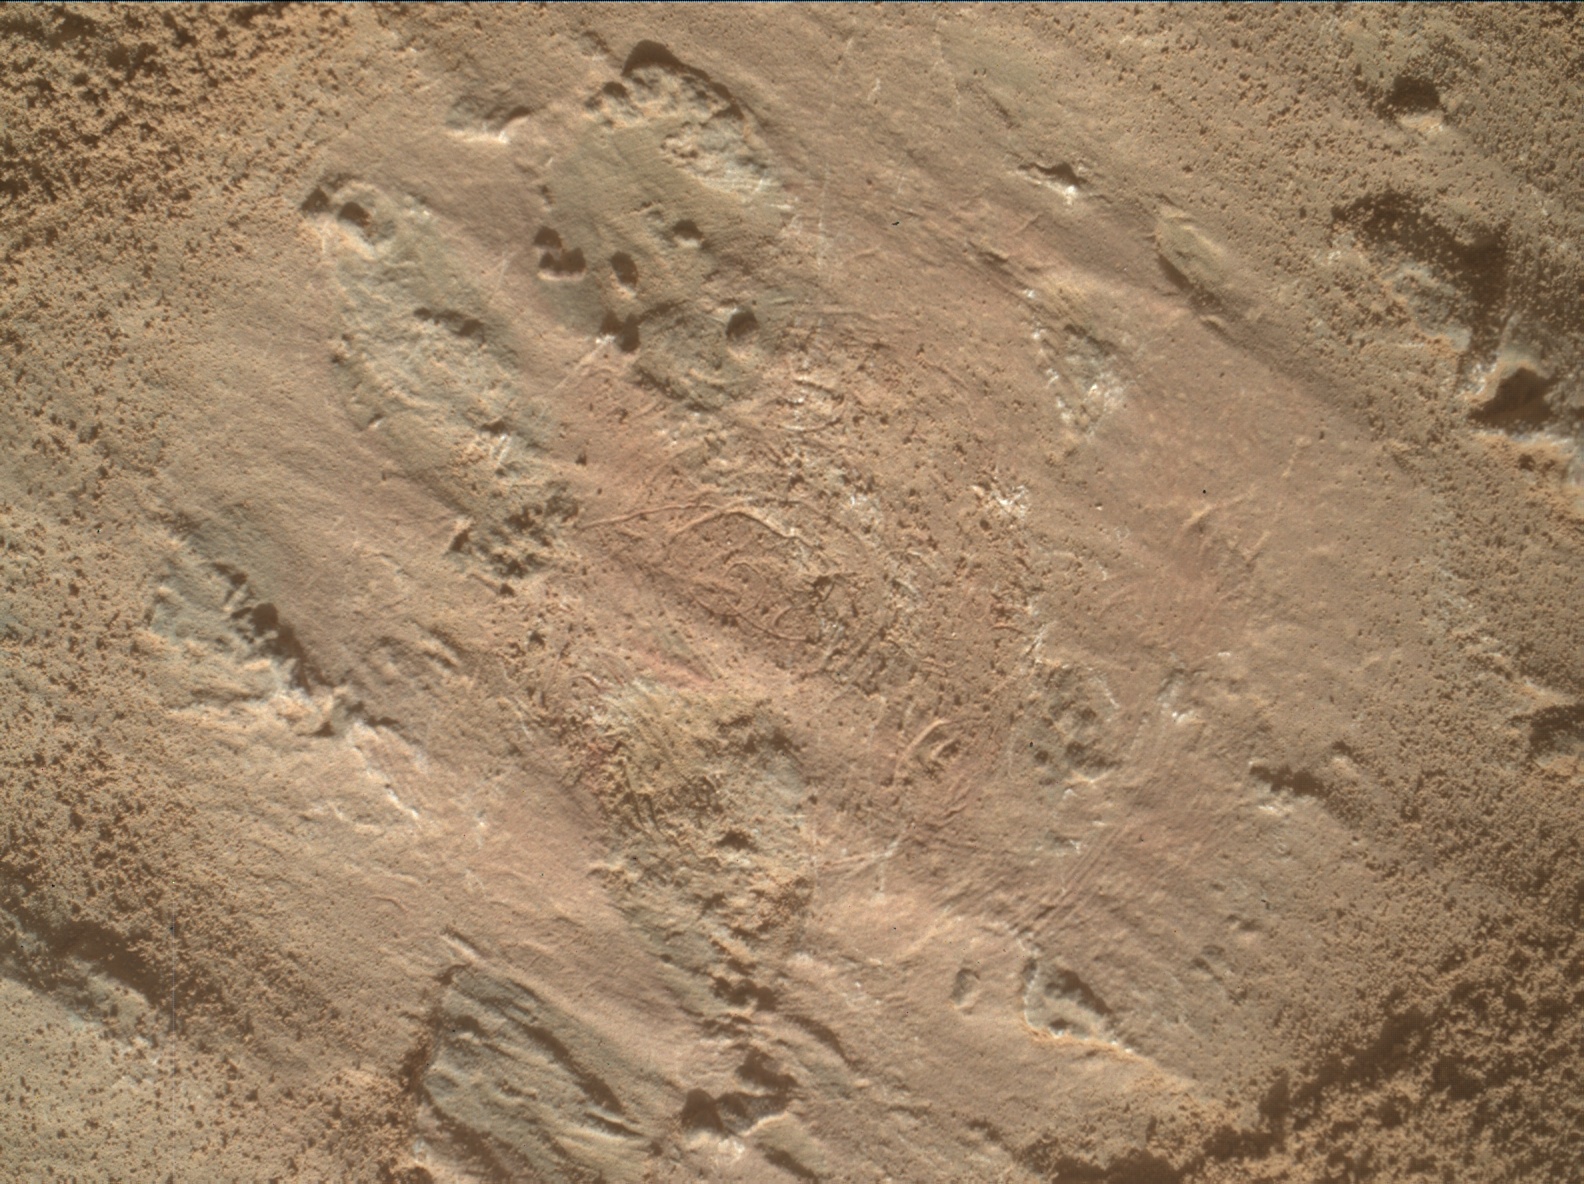 Nasa's Mars rover Curiosity acquired this image using its Mars Hand Lens Imager (MAHLI) on Sol 3201